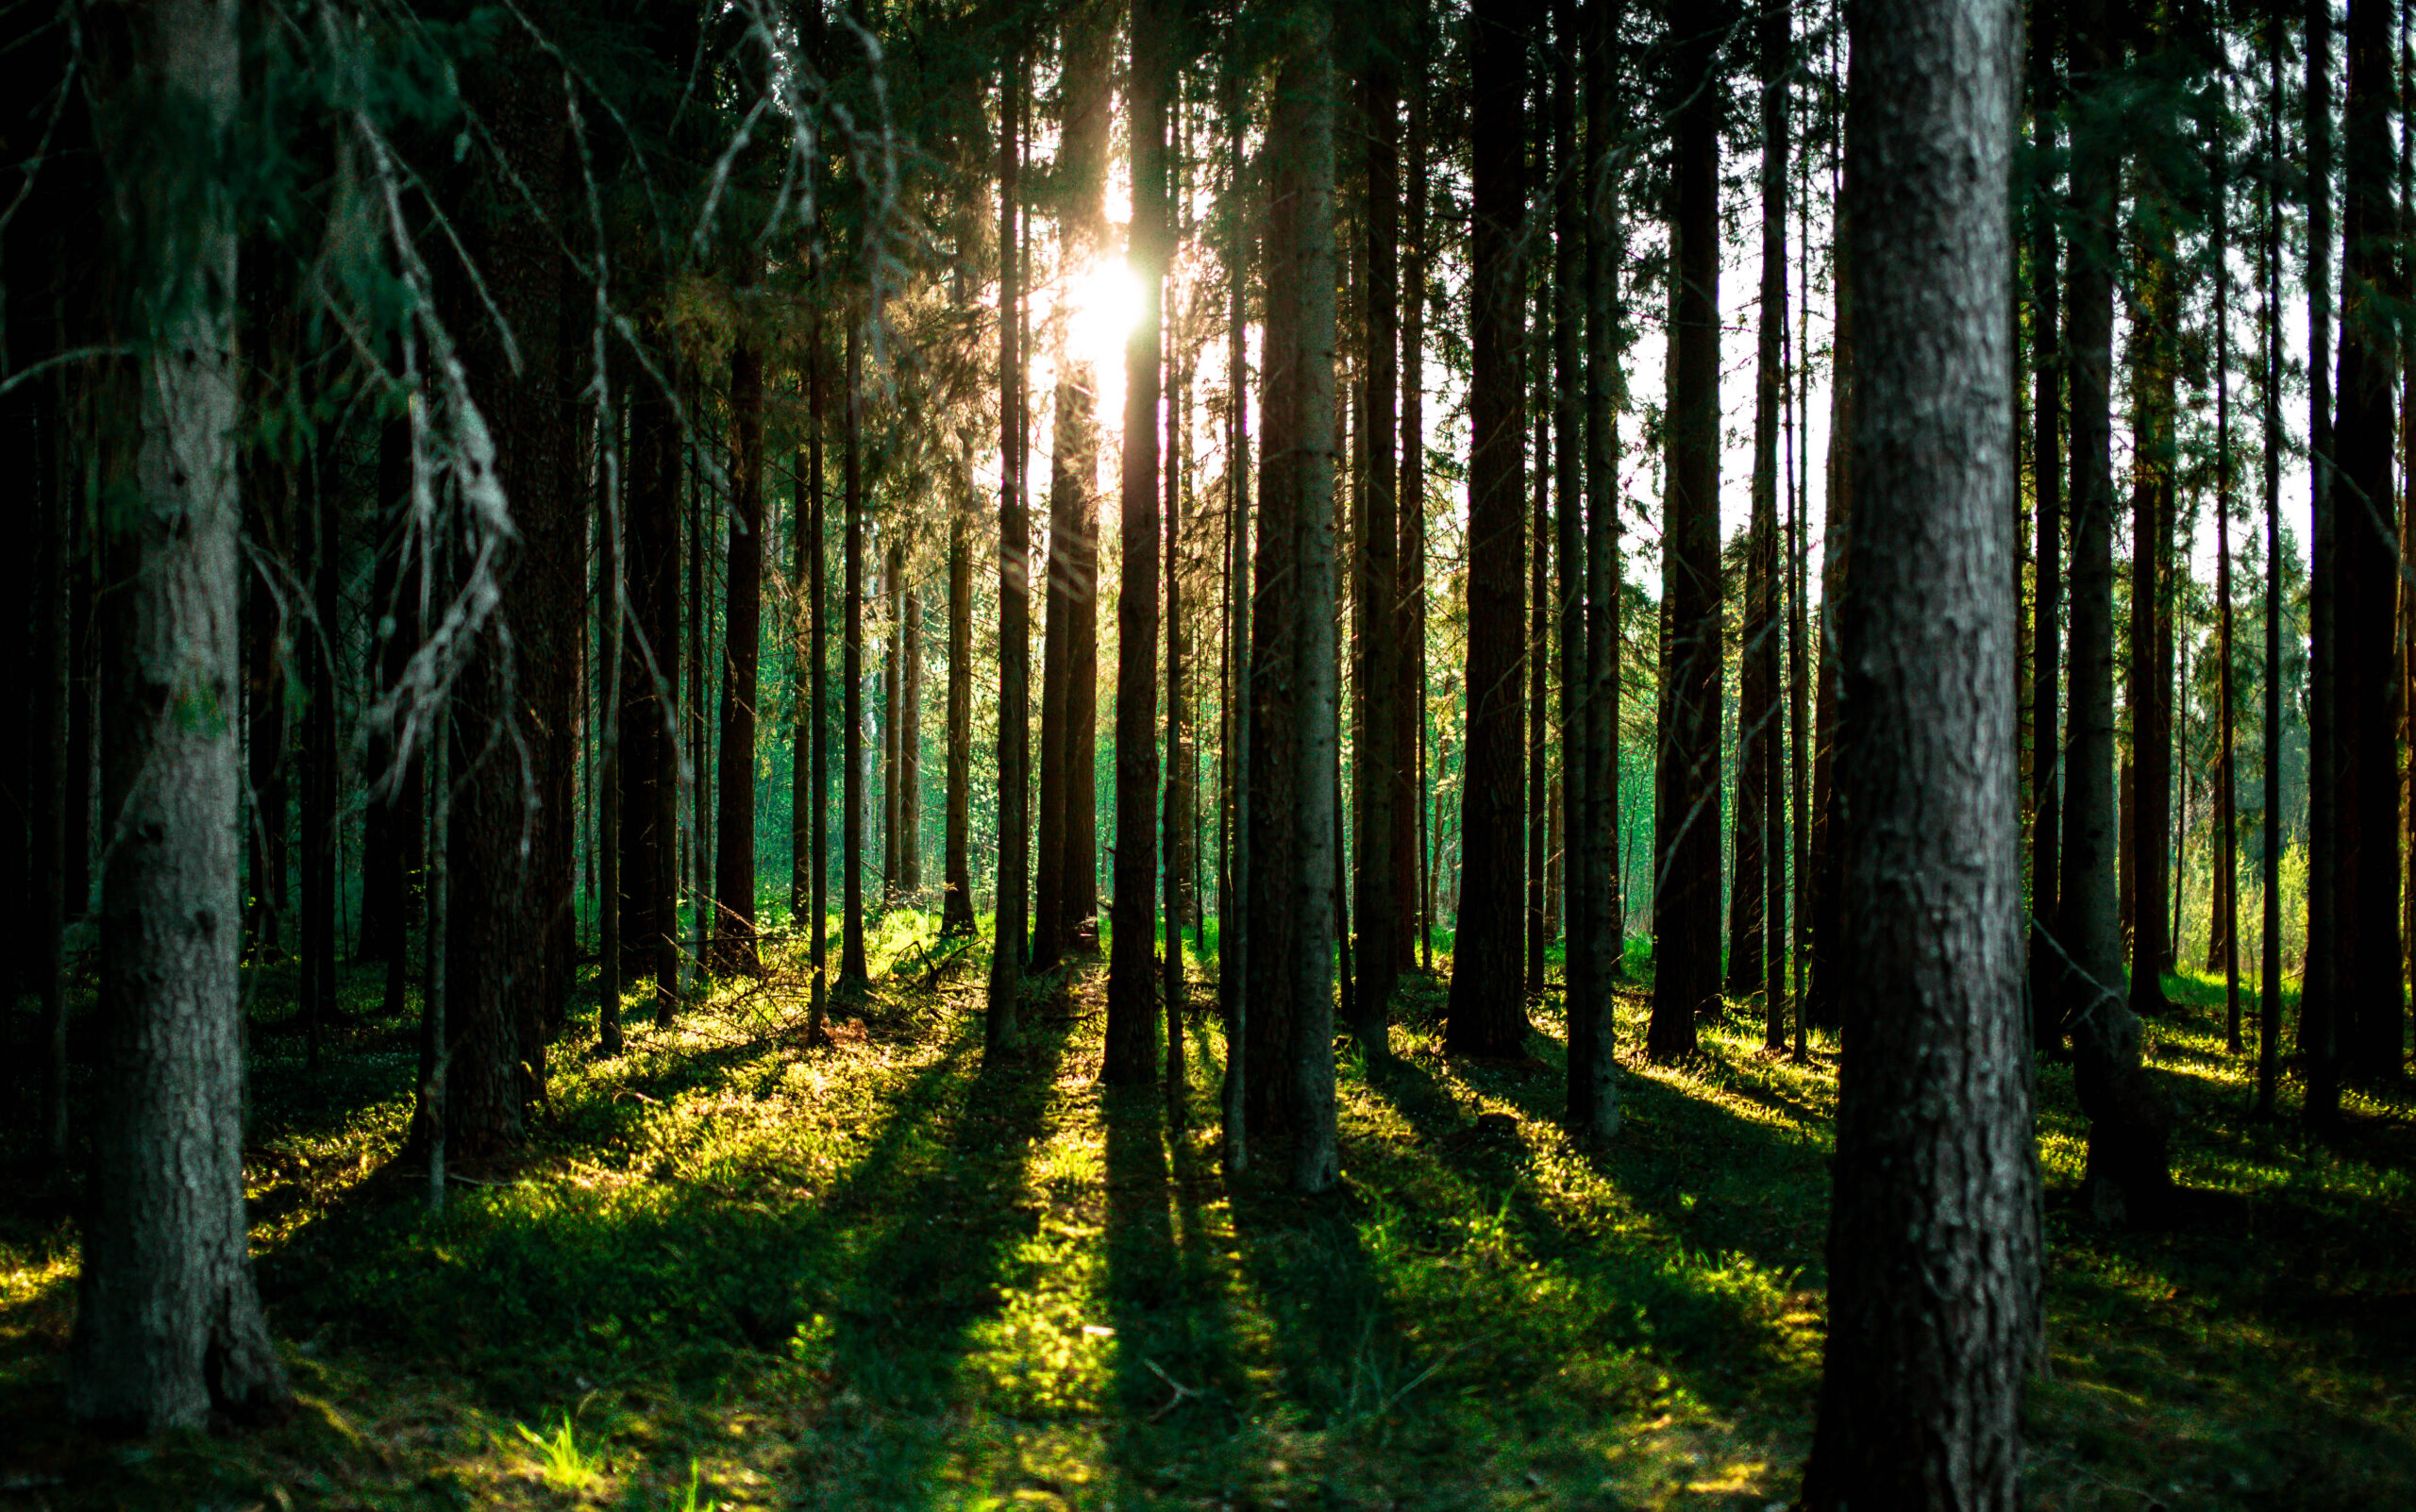 Wild forest in sunshine by Prosawood